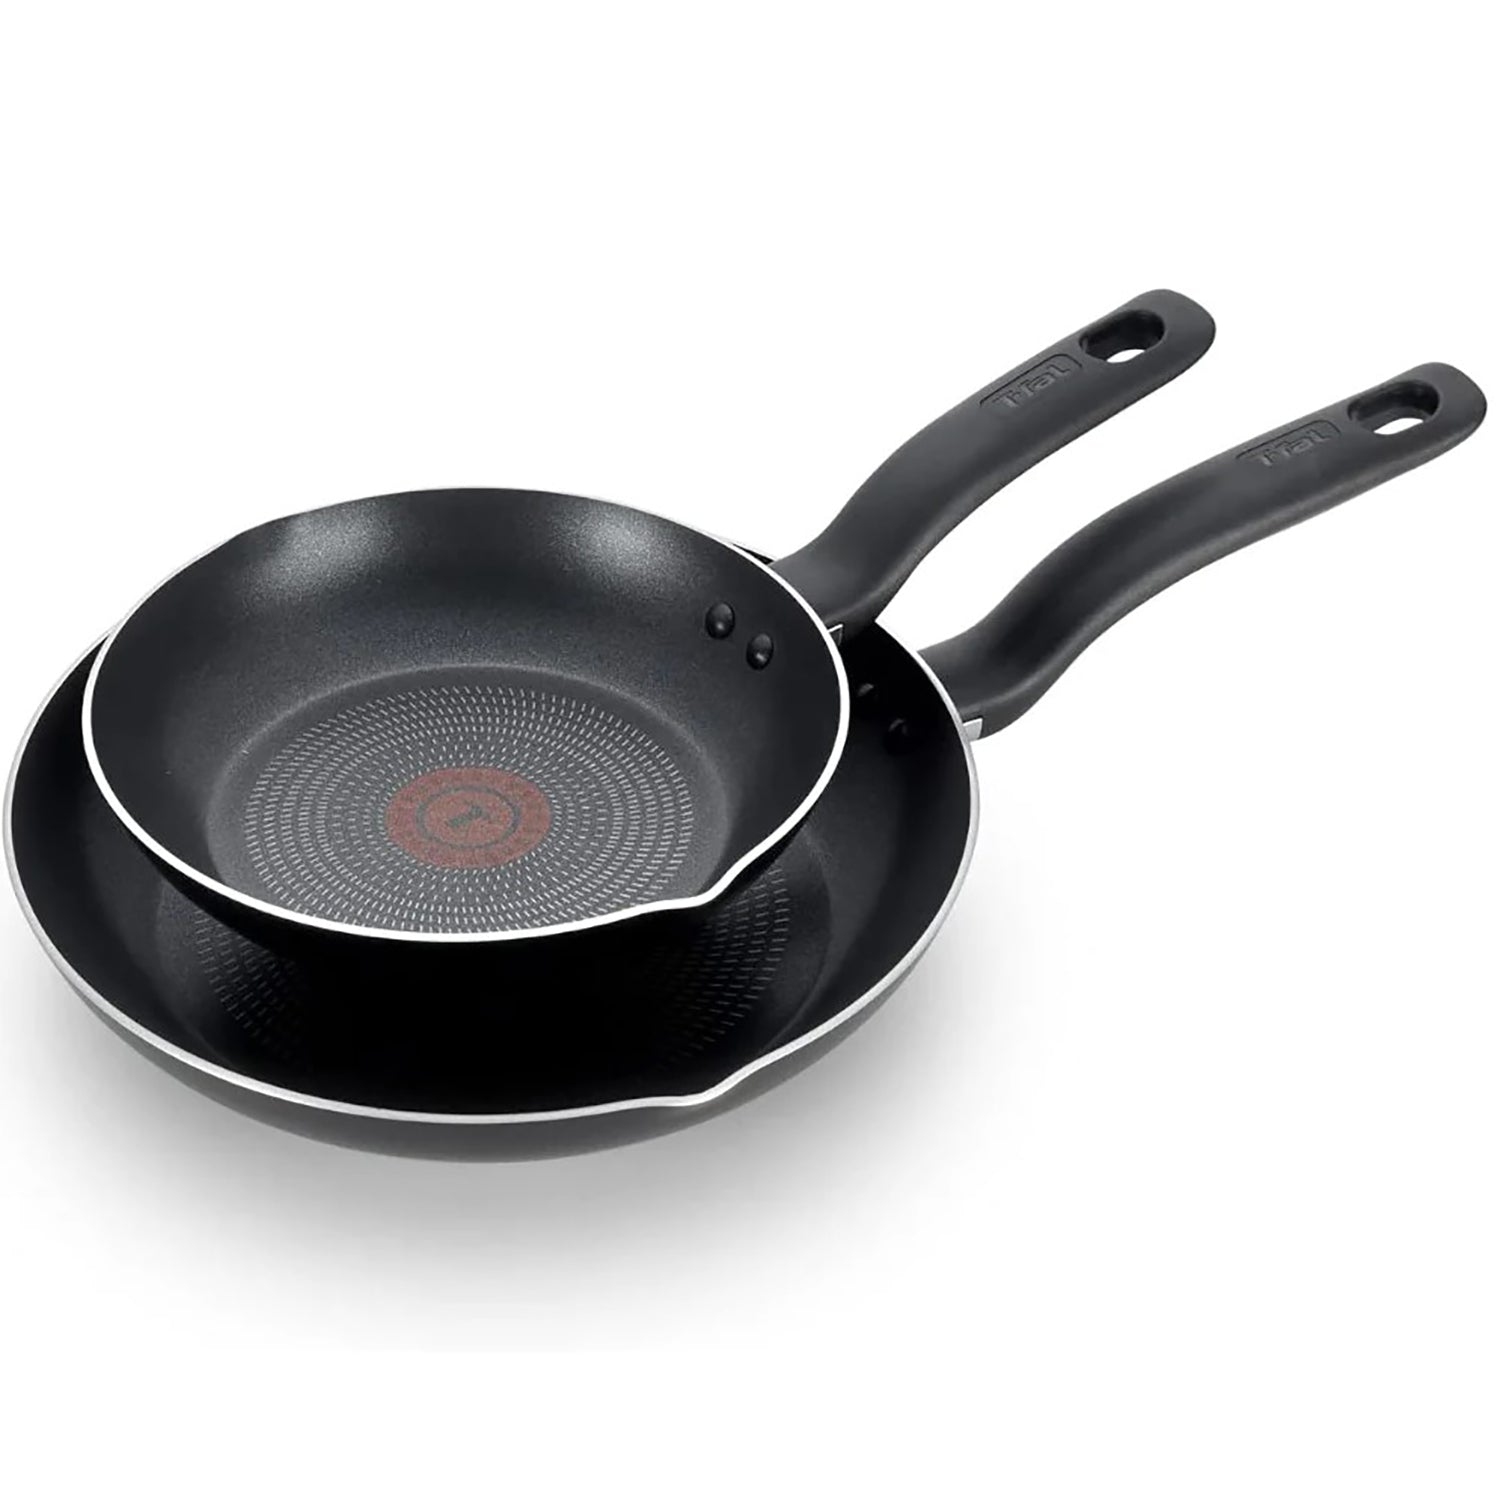 T-Fal - Set of 2 Aluminum Frying Pans, Non-Stick Surface, Thermo-Spot Technology